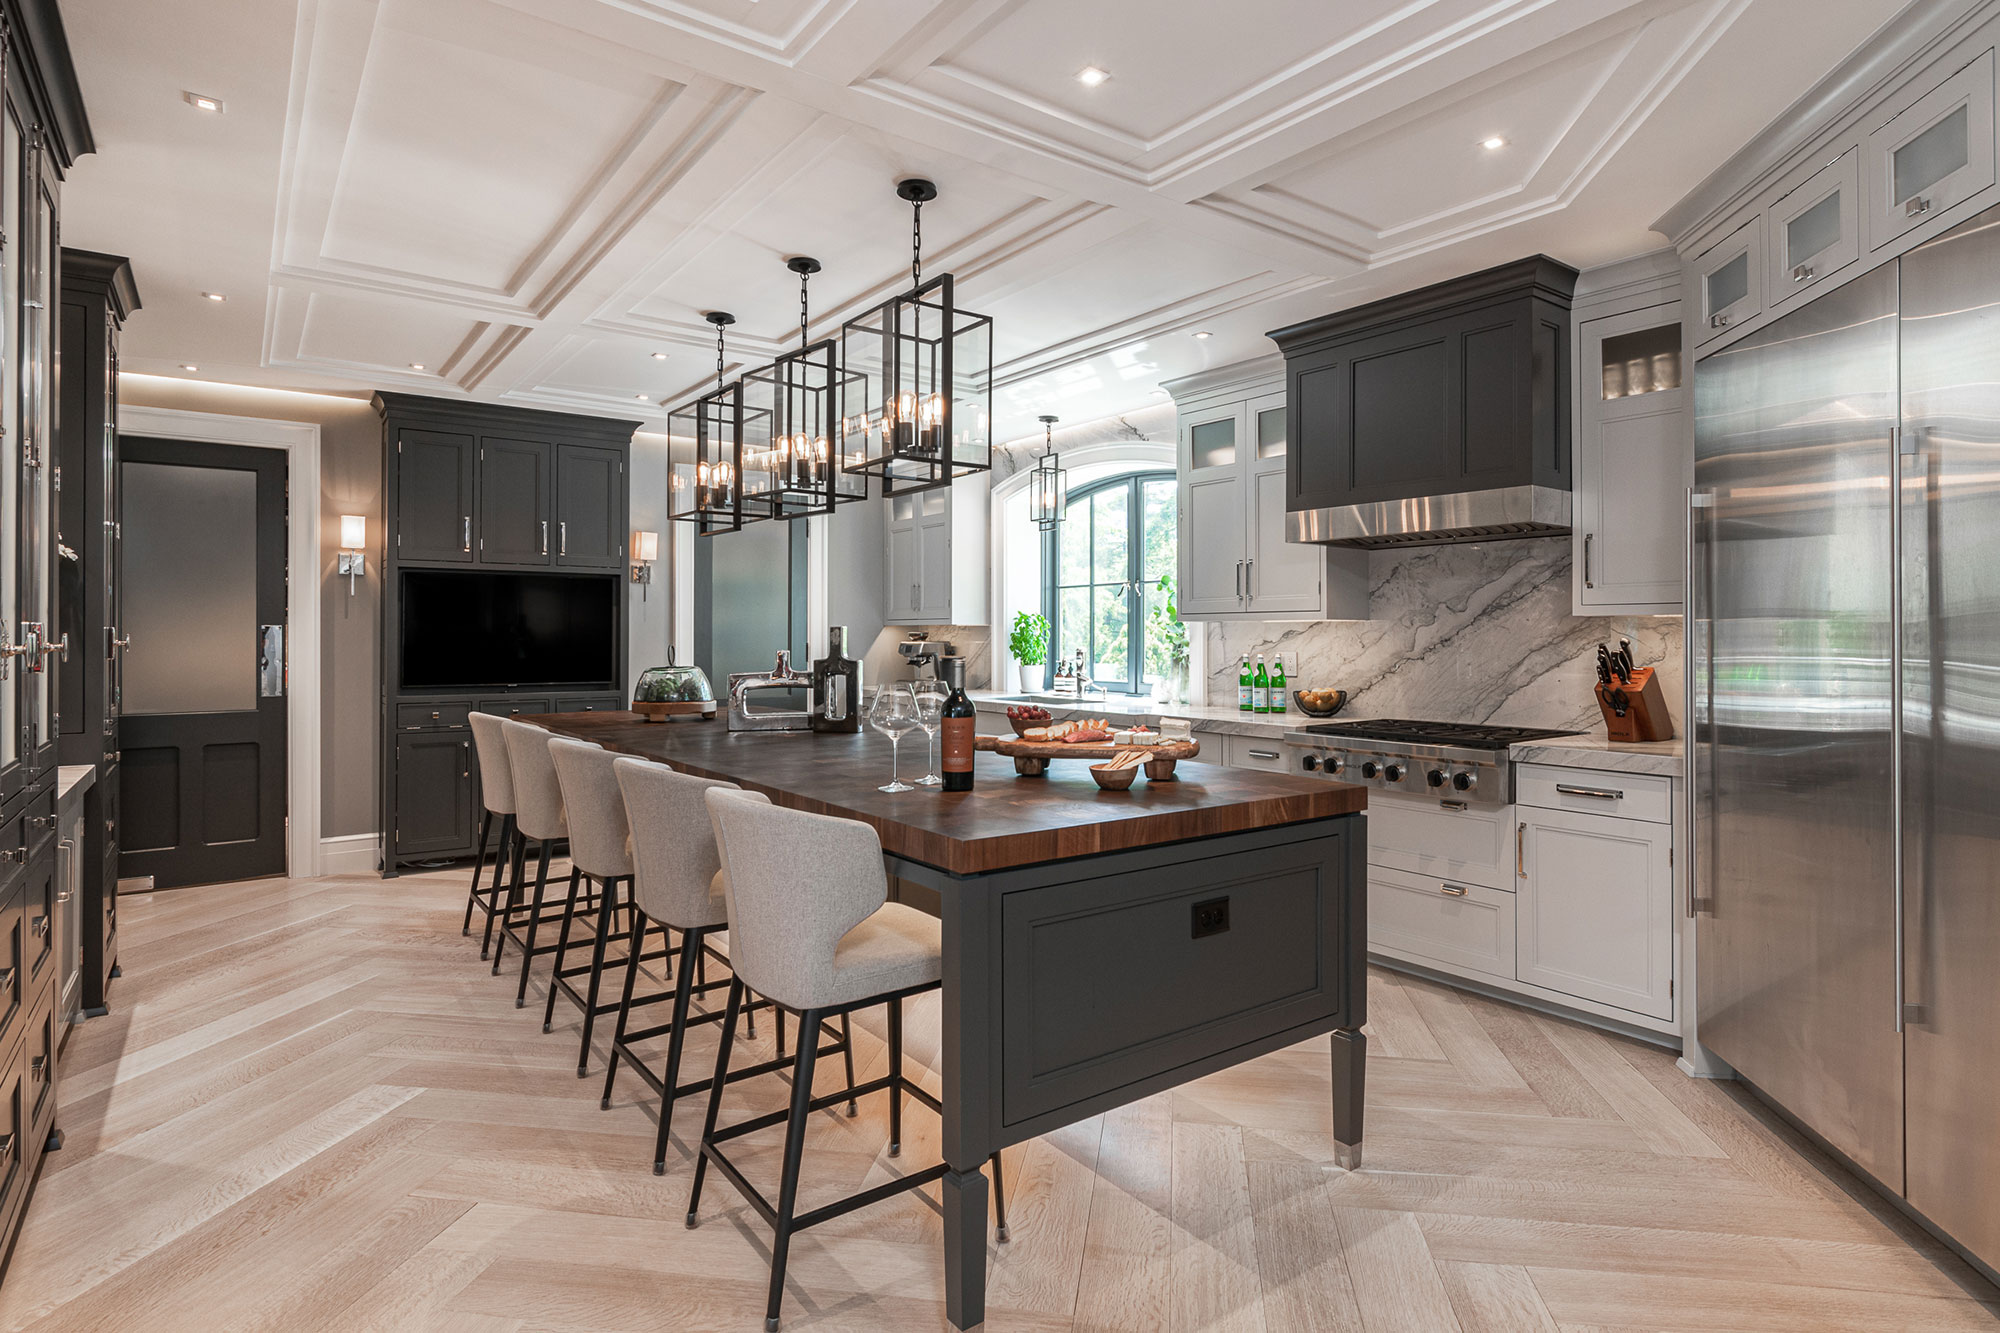 Governor's Mansion Kitchen Remodel by Stratton Design Group